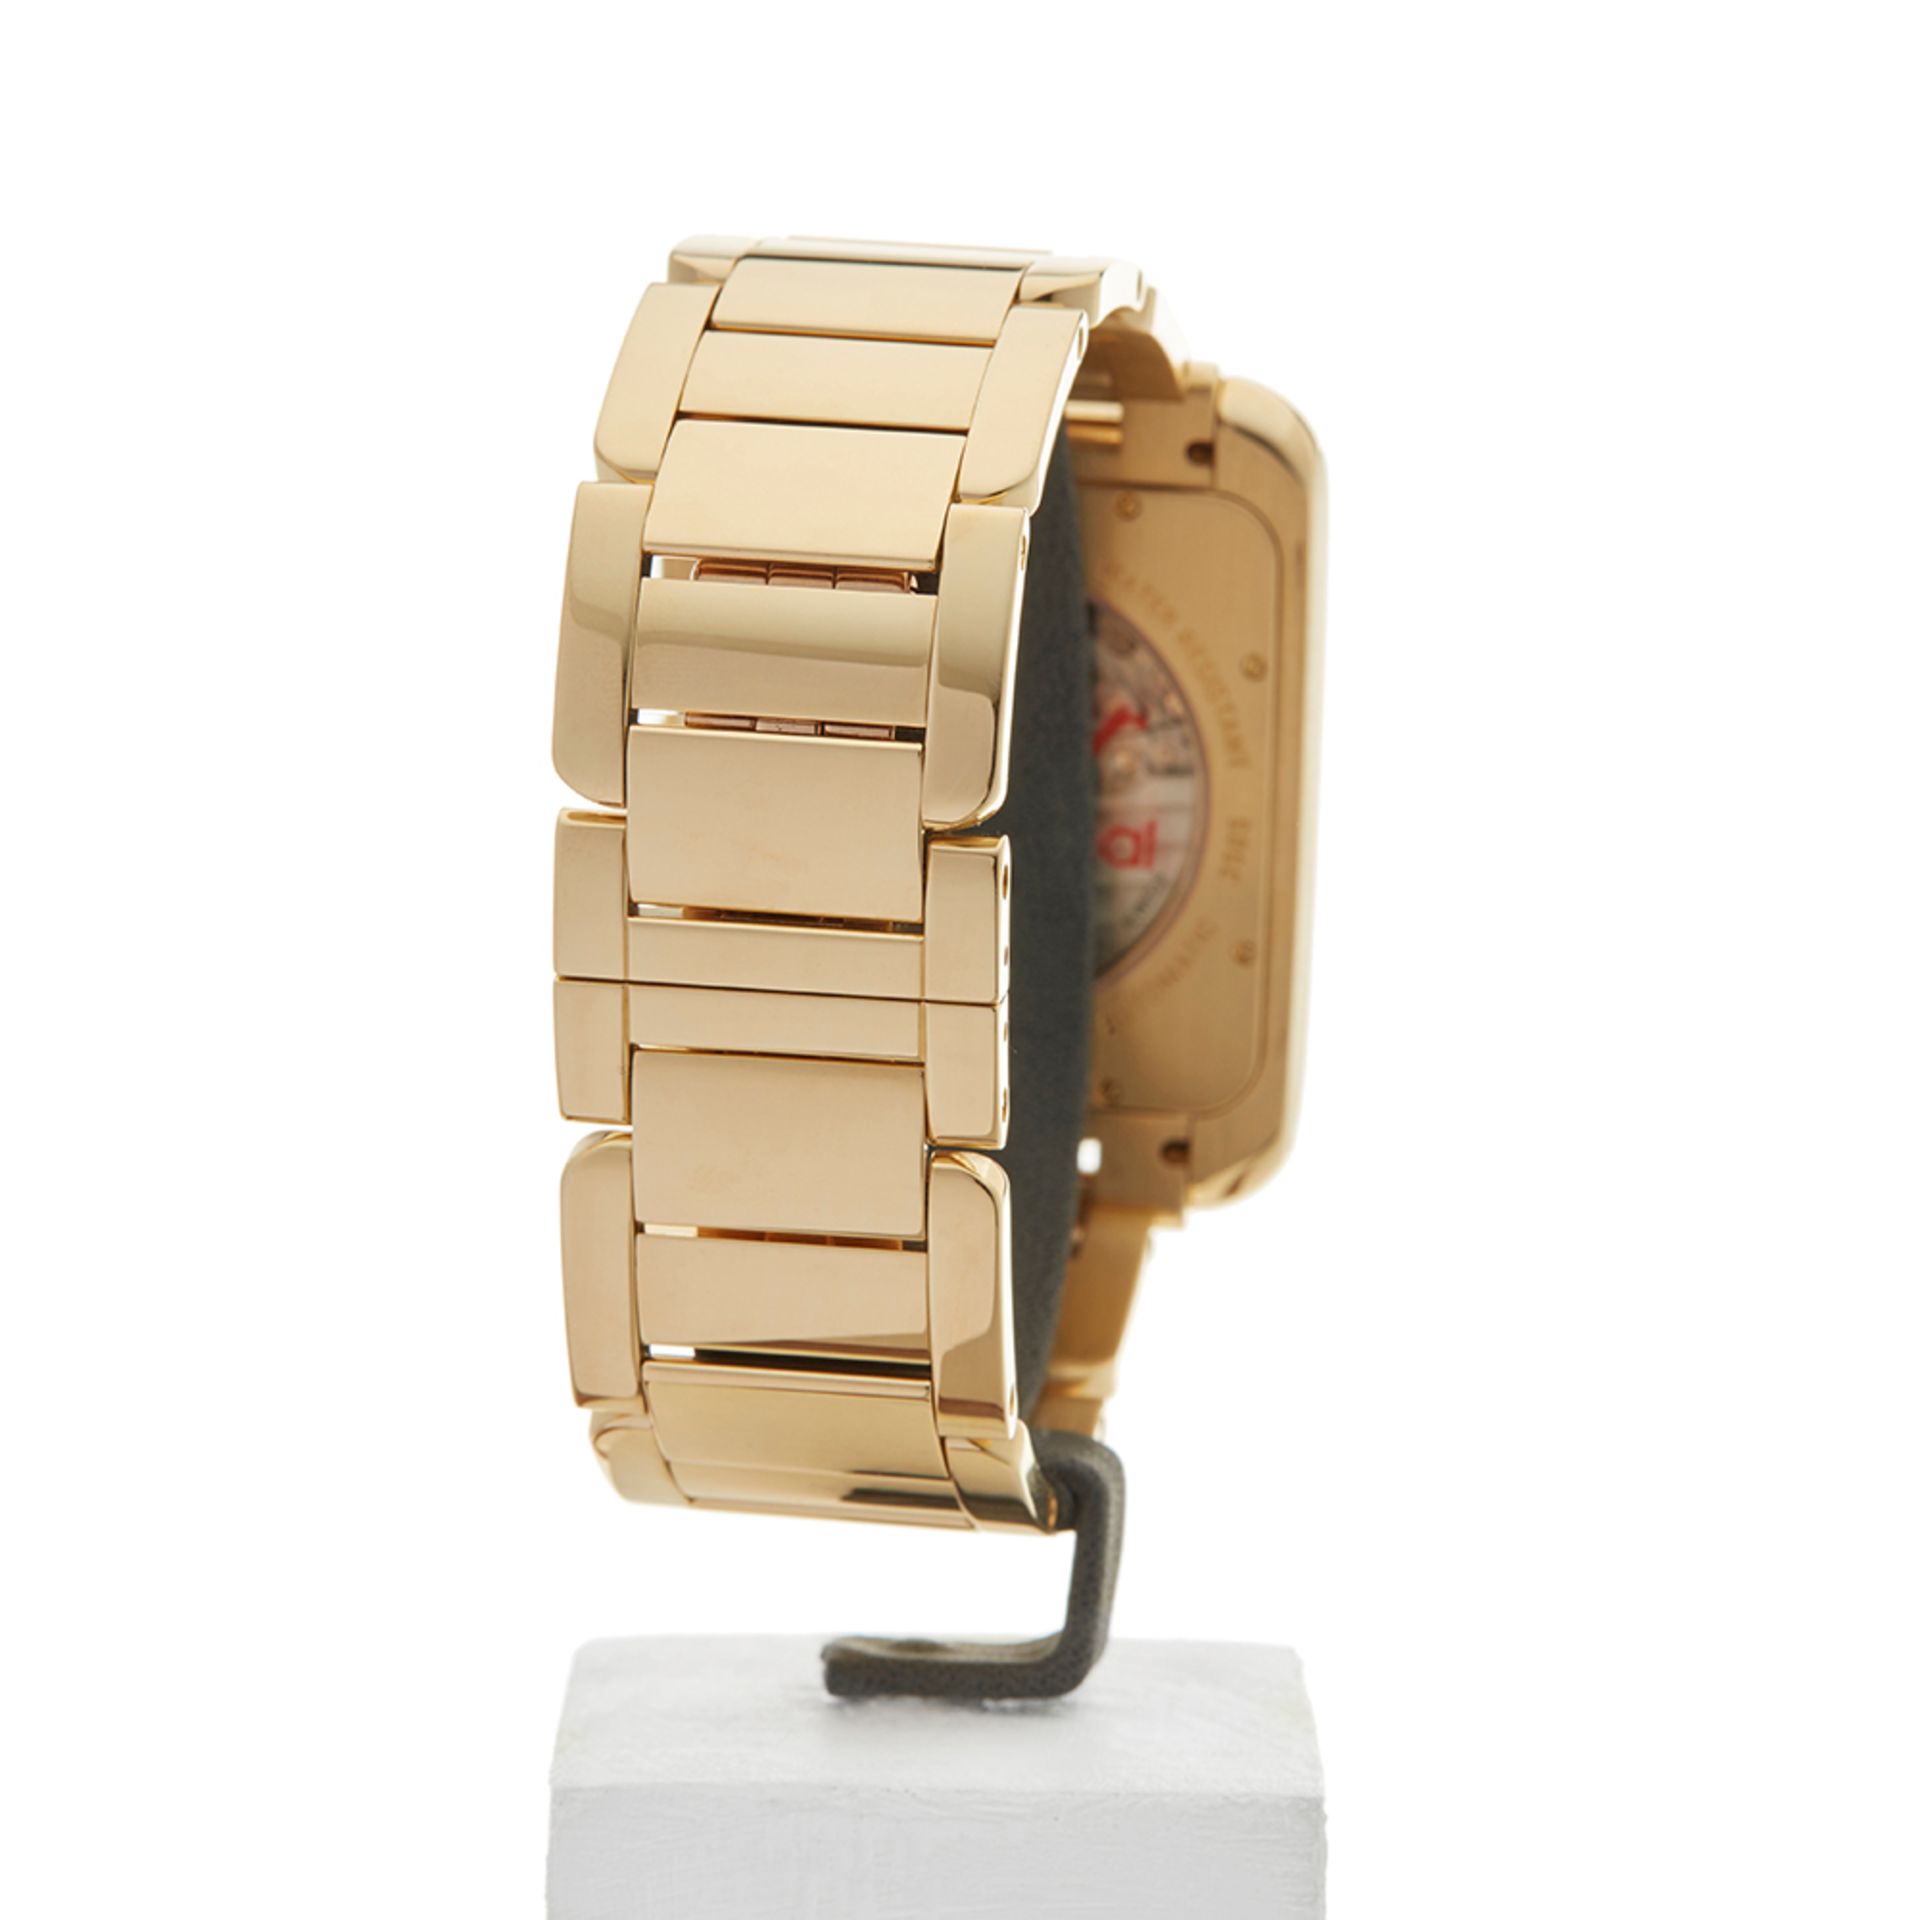 Cartier Tank Anglaise 37mm 18k Yellow Gold - 3505 or W5310018 - Image 7 of 8